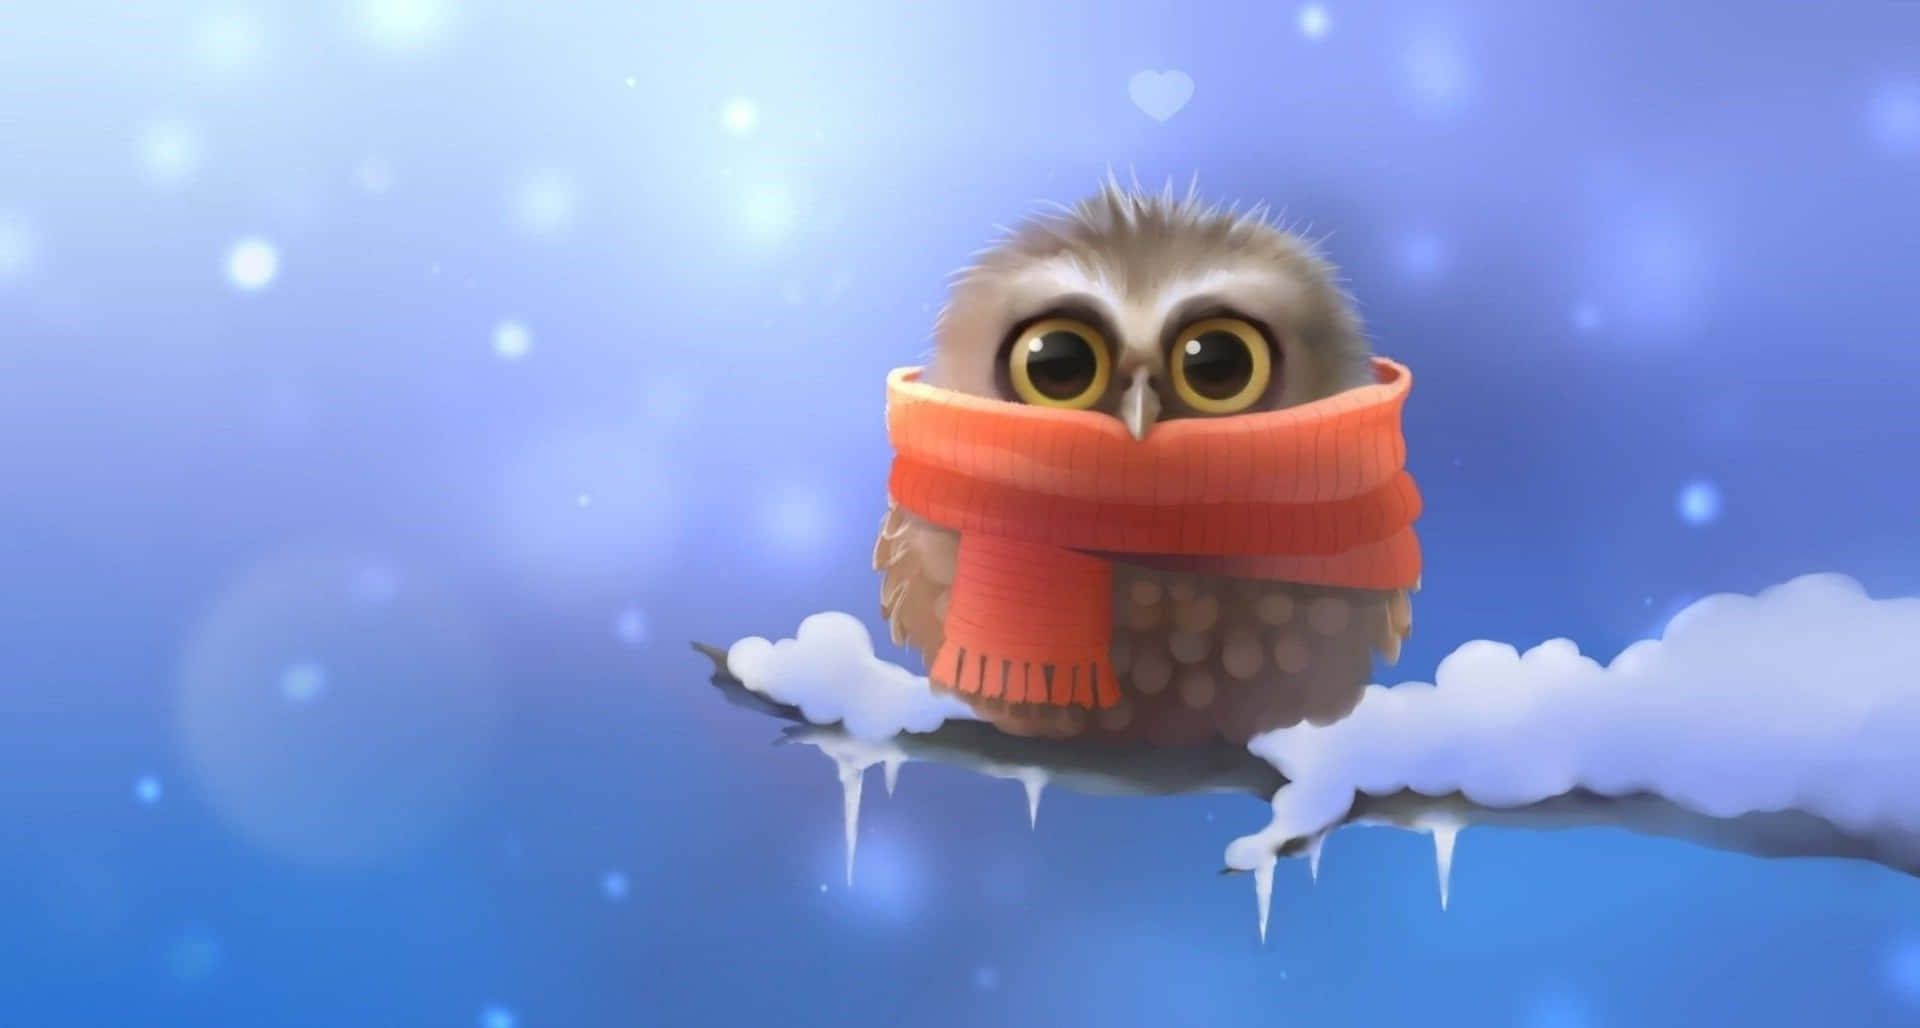 Funny Snow Cartoon Owl On Tree Branch Picture